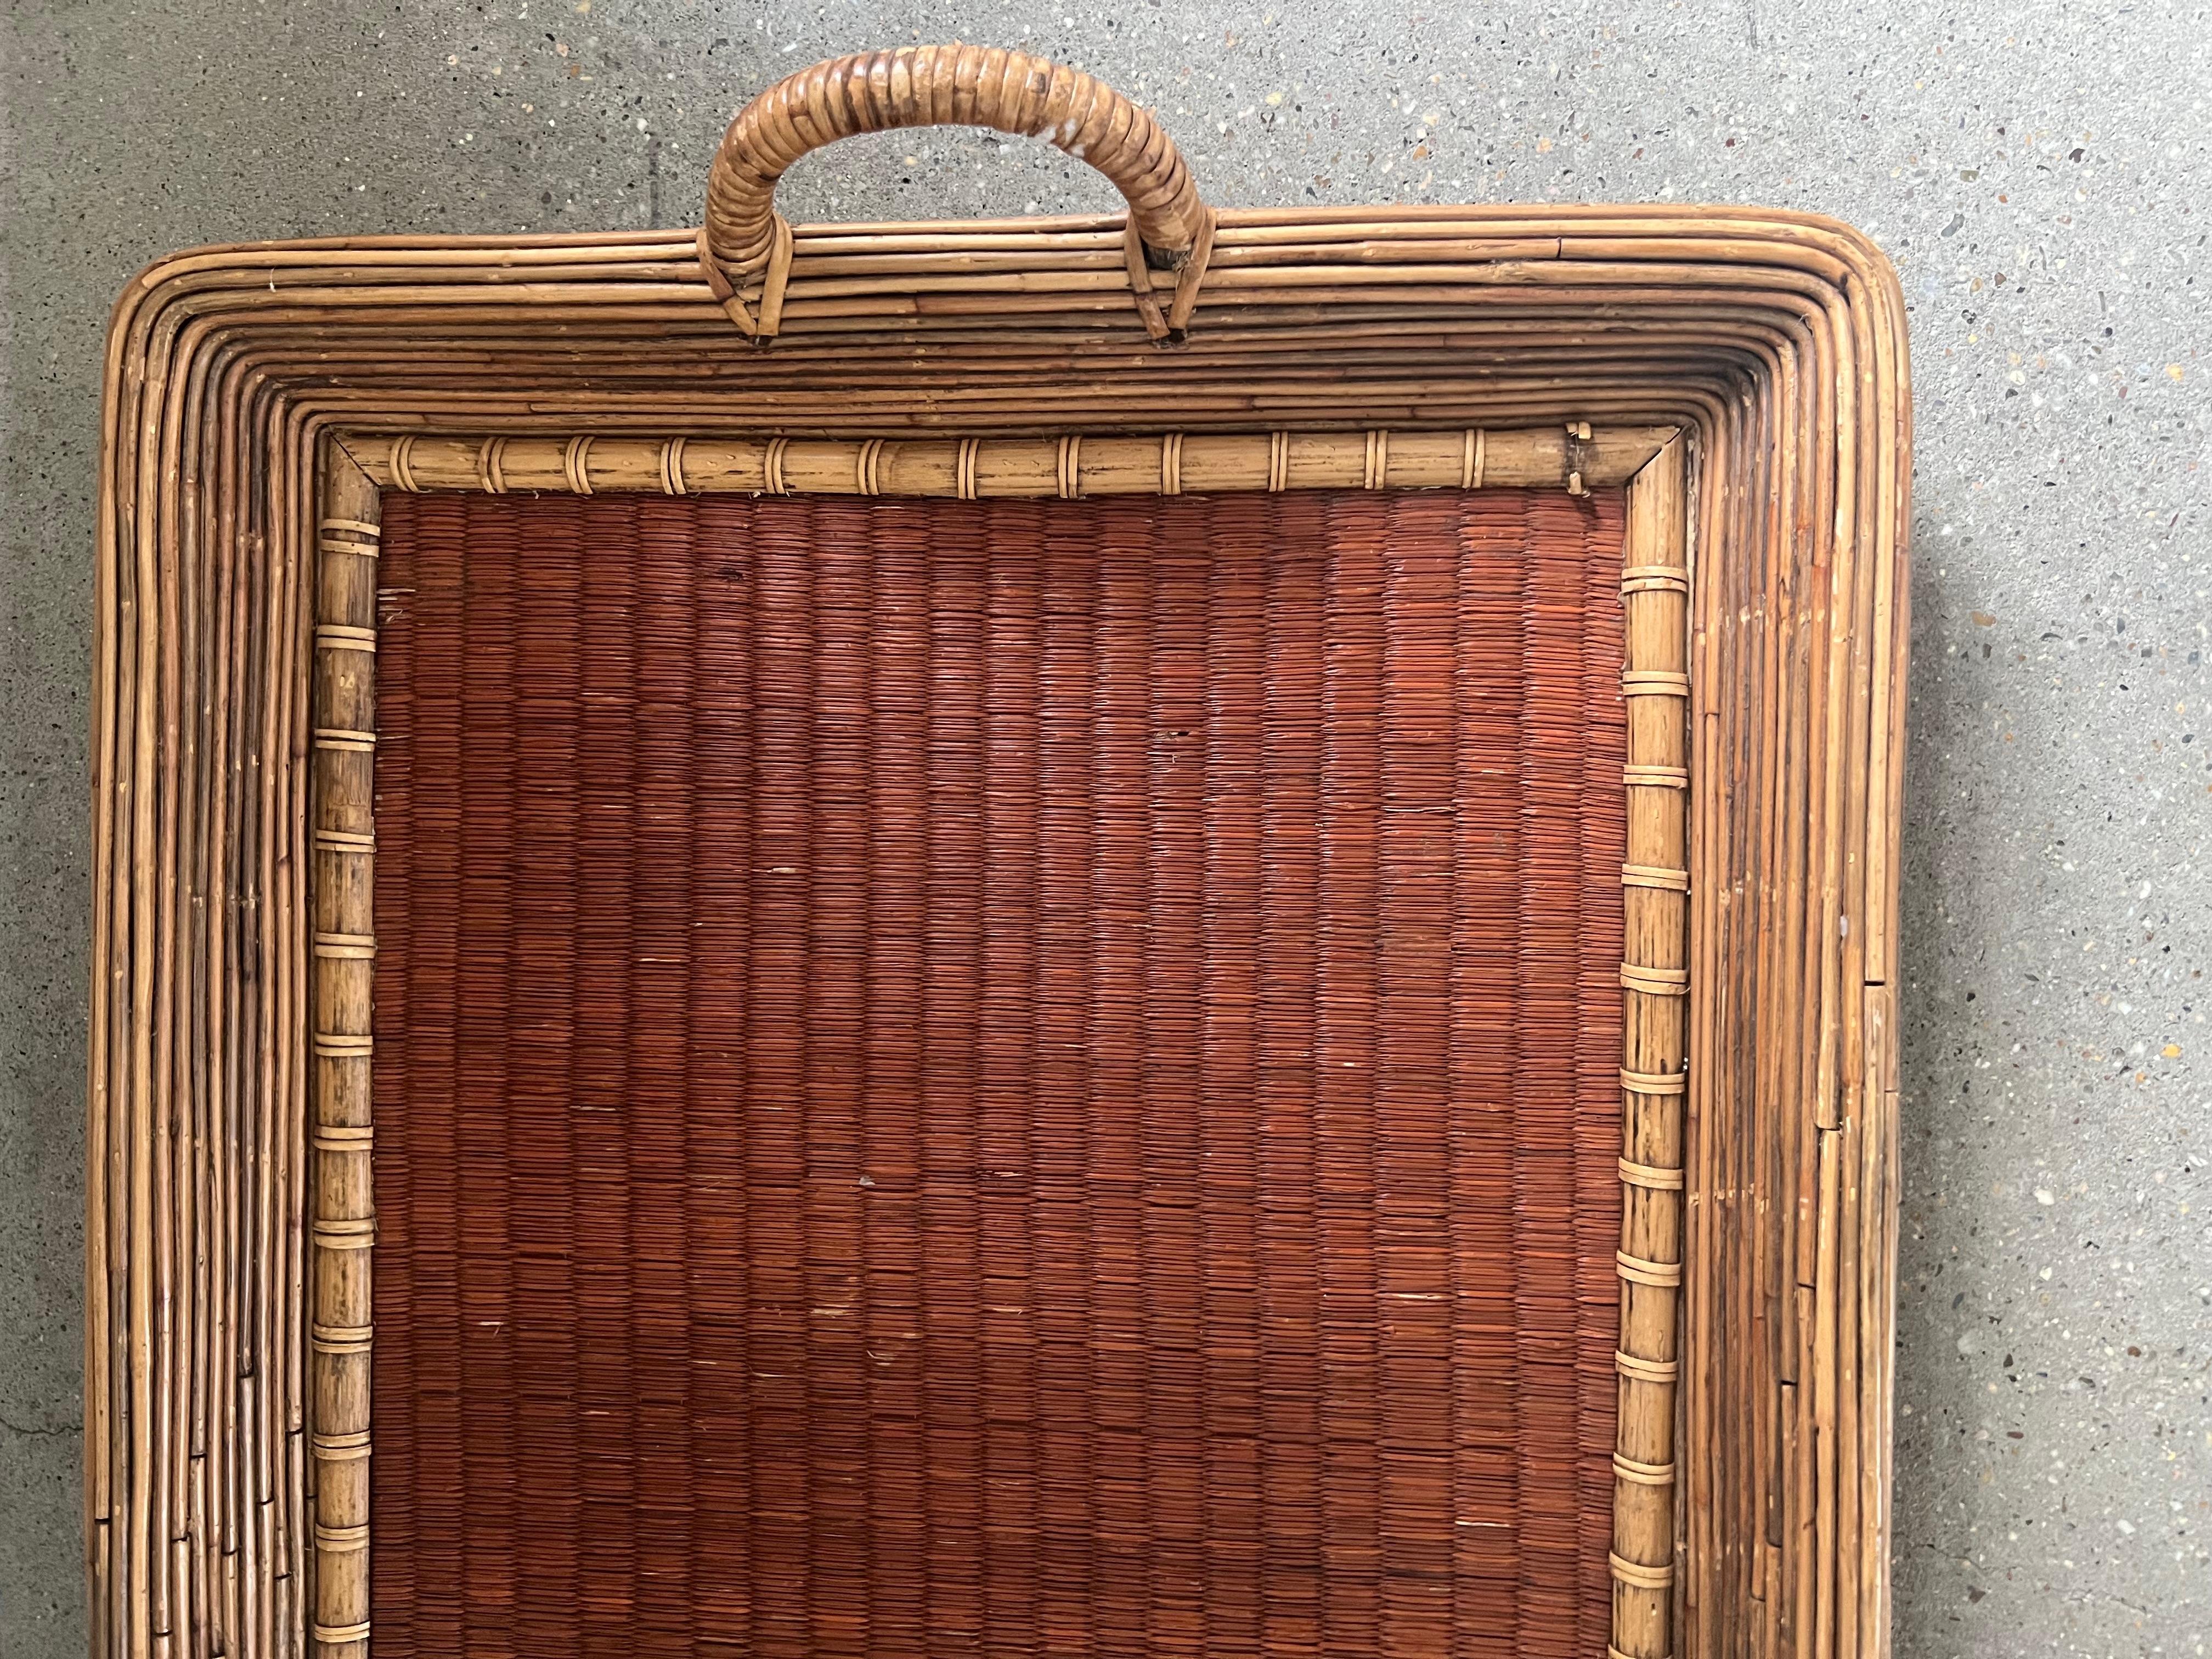 The tray's elongated design, a hallmark of Japanese aesthetics, offers a generous surface for serving and display, while its intricate weave patterns add a touch of sophistication. The natural beauty of bamboo, with its warm hues and organic